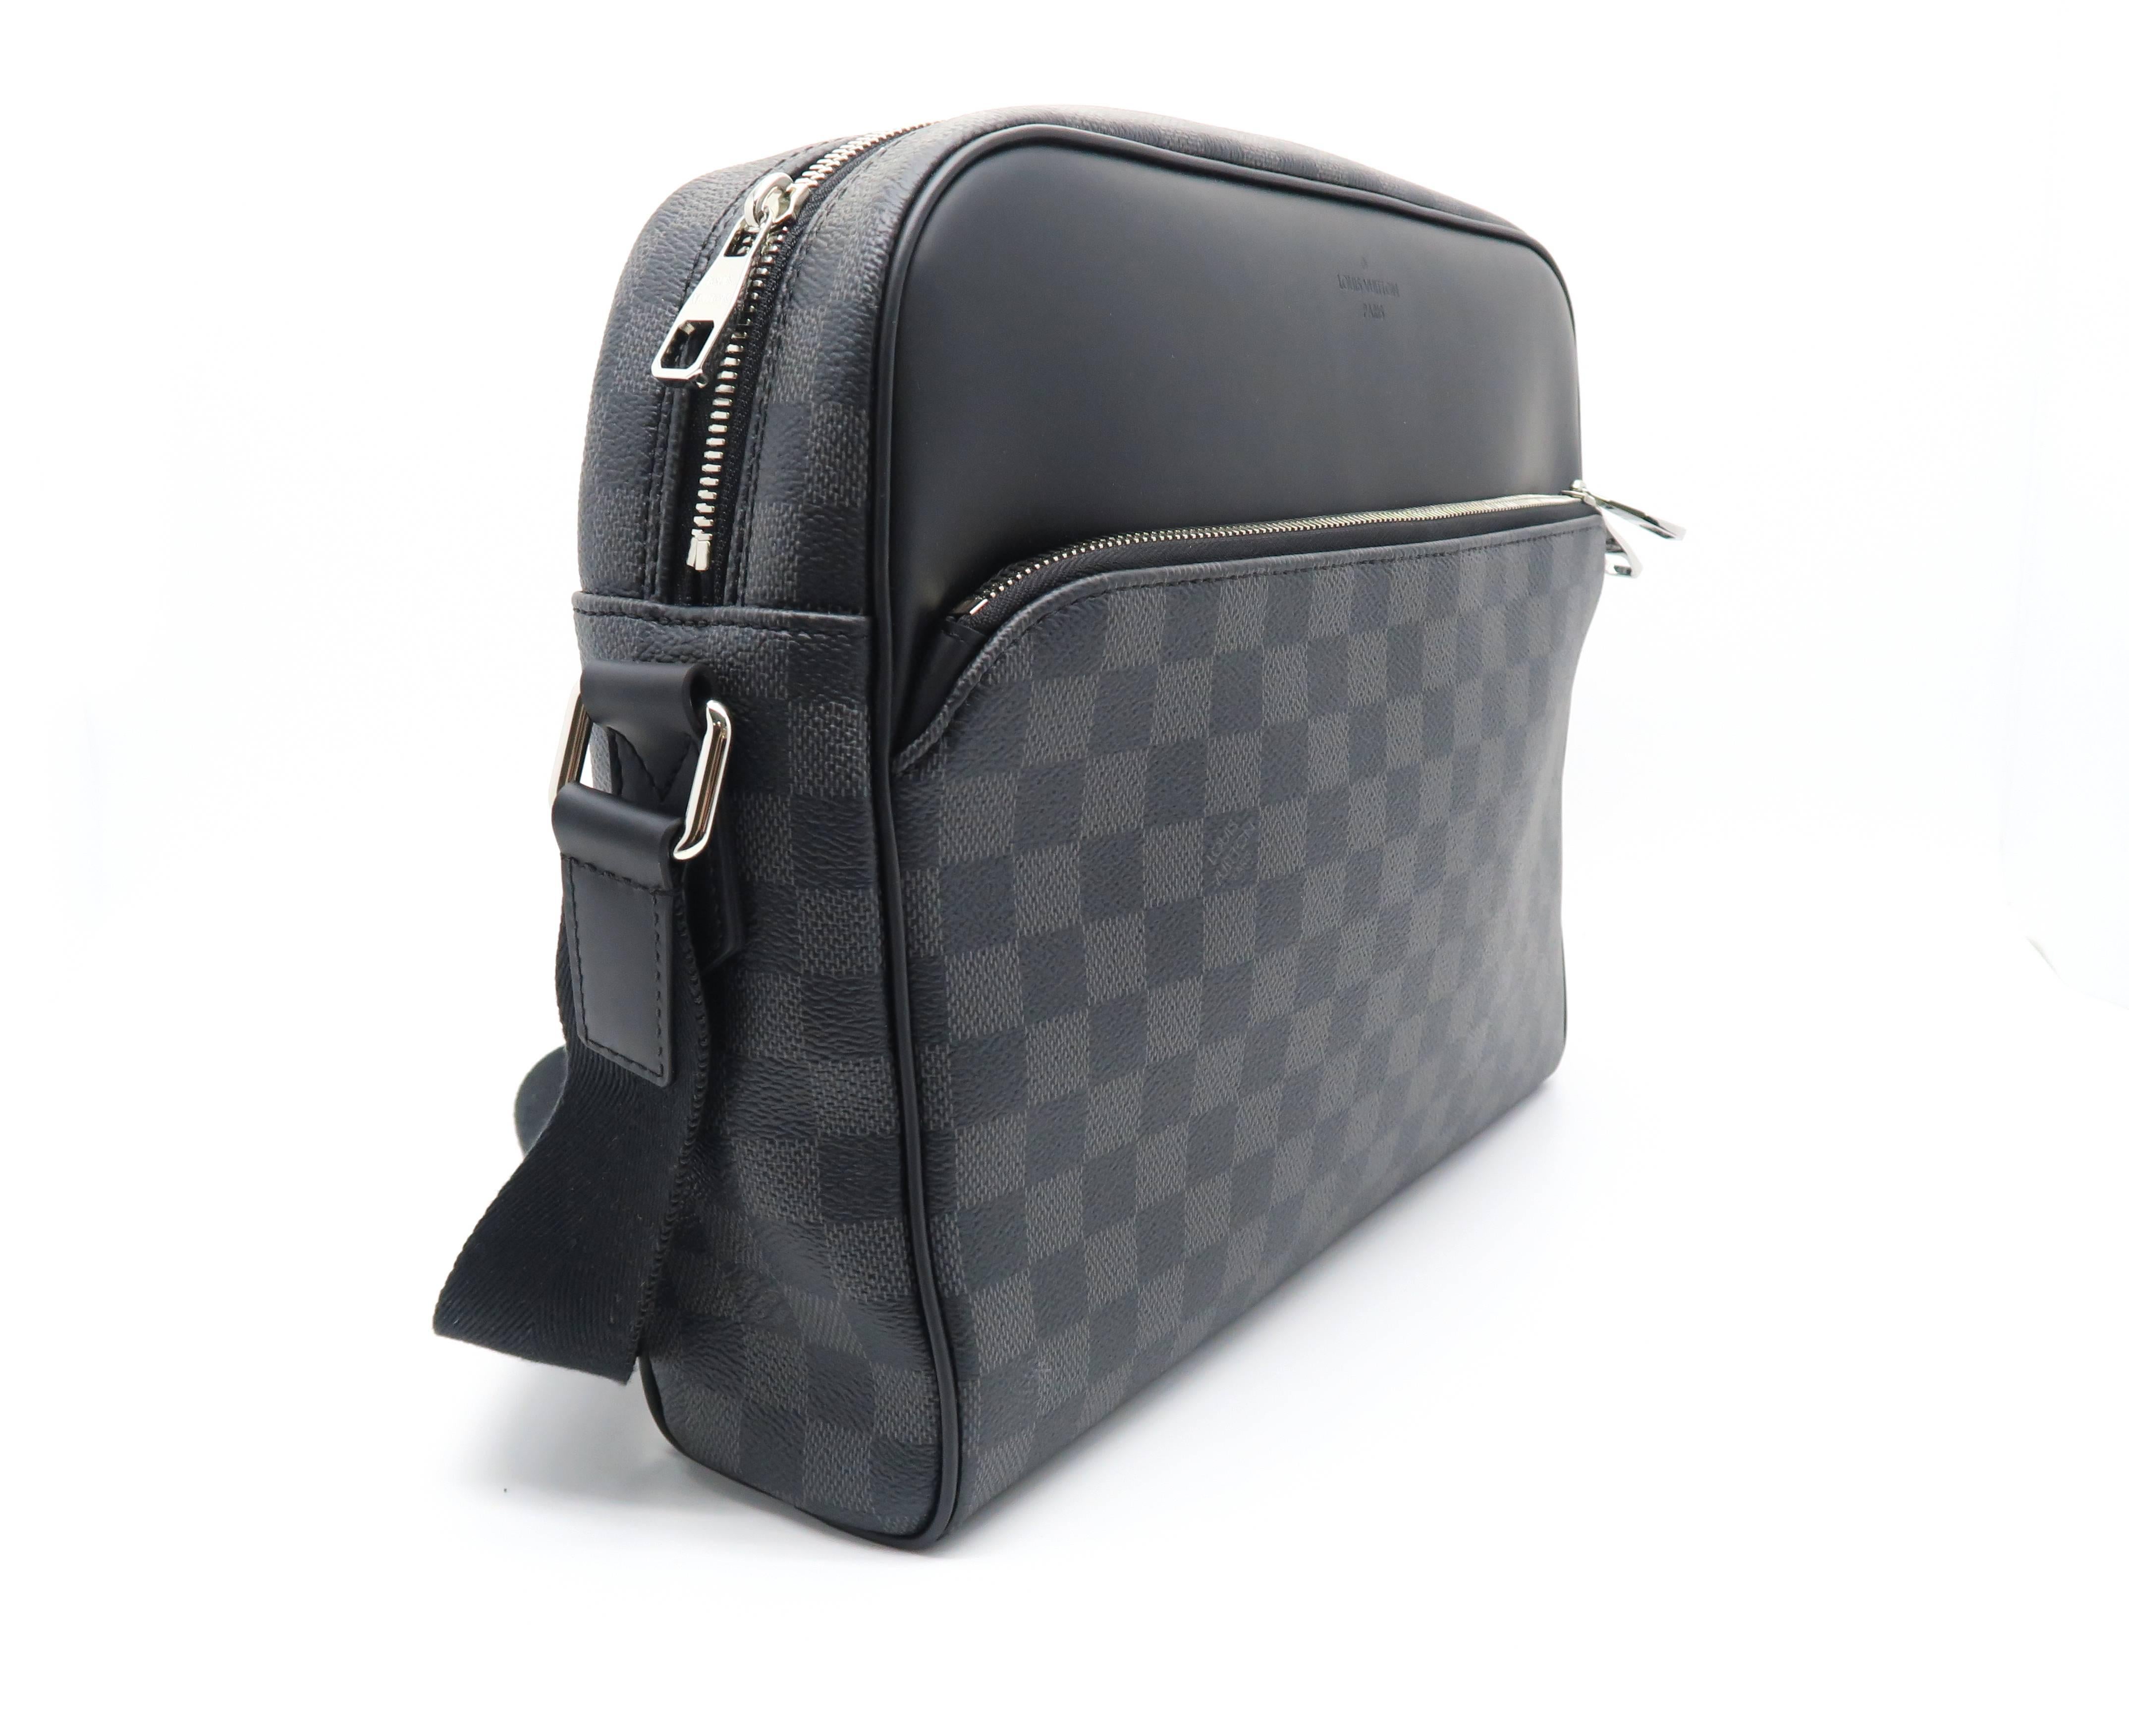 Color: Grey-Ish Black

Material: Damier Graphite

Condition: New 
Overall: Brand New, Not Used
Surface: Good
Corners: Good 
Edges: Good
Handles/Straps: Good
Hardware: Good

Dimension: W34 × H27 × D8cm（W13.3" × H10.6" × D3.1"）
Shoulder